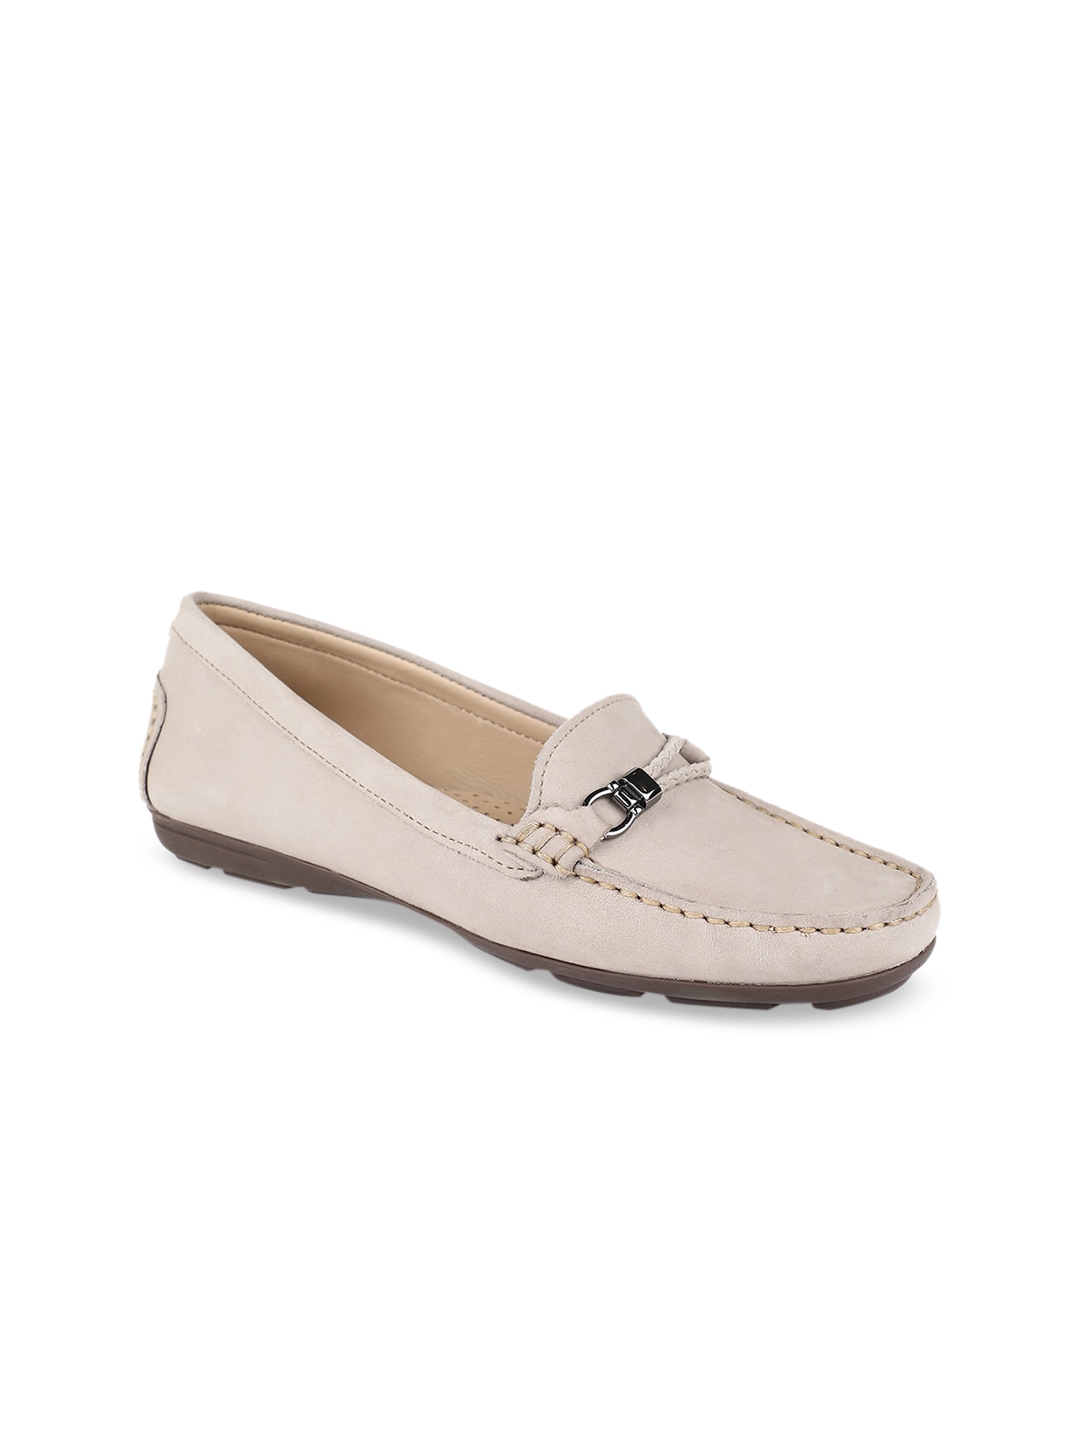 Buy Hush Puppies Women Taupe Horsebit Loafers - Casual Shoes for Women ...